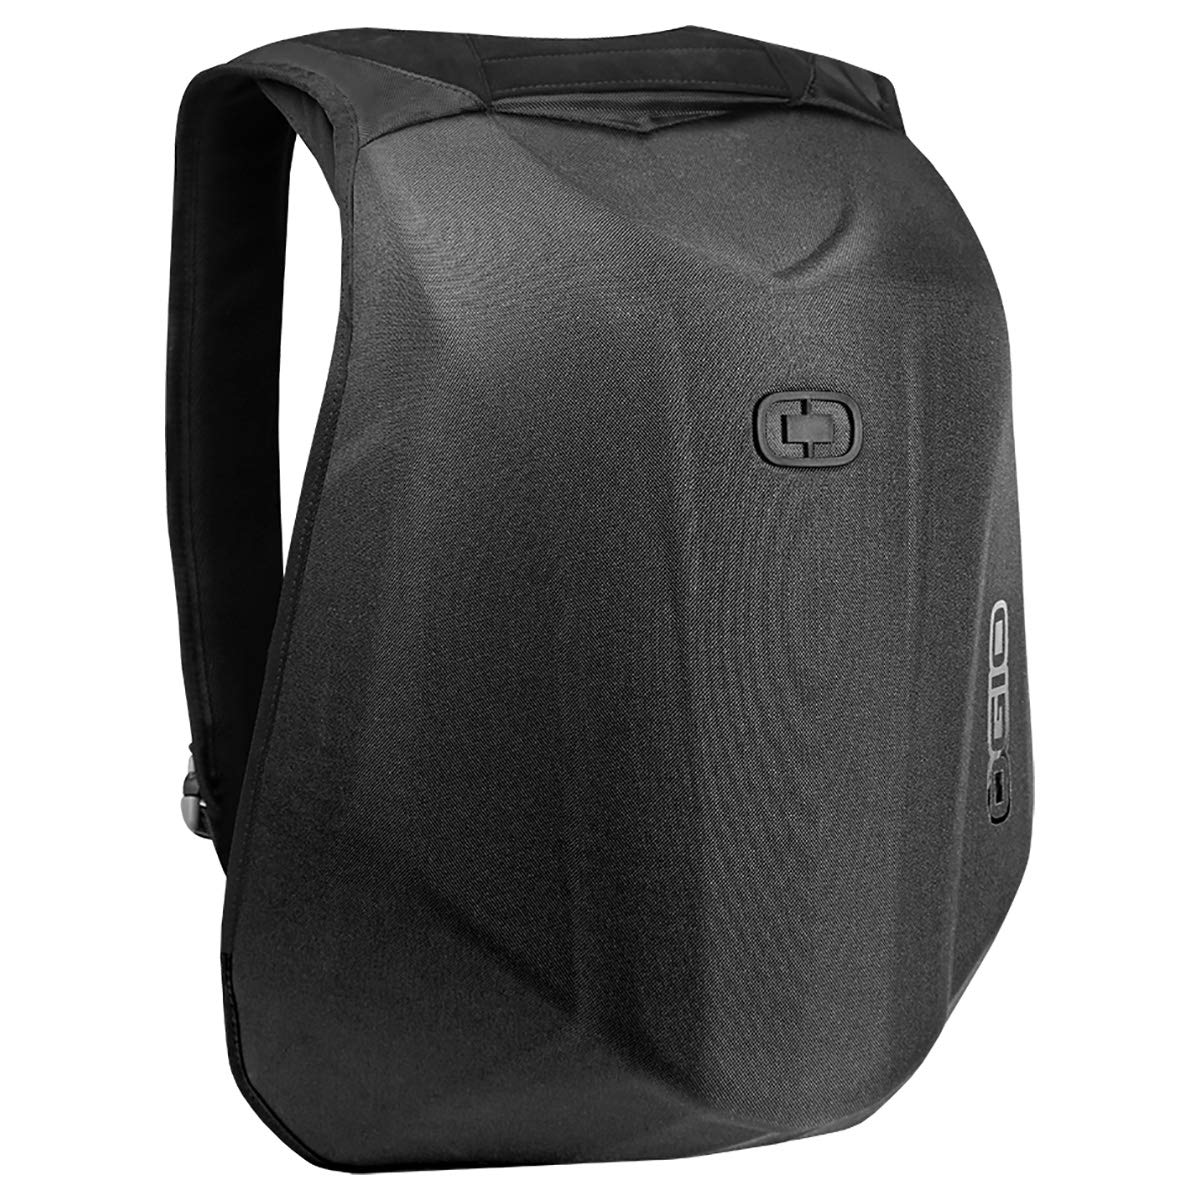 OGIO 123008.36 No Drag Mach 1 Motorcycle Backpack - Stealth Black, 19&quot; H x 12.5&quot; W x 6.5&quot; D